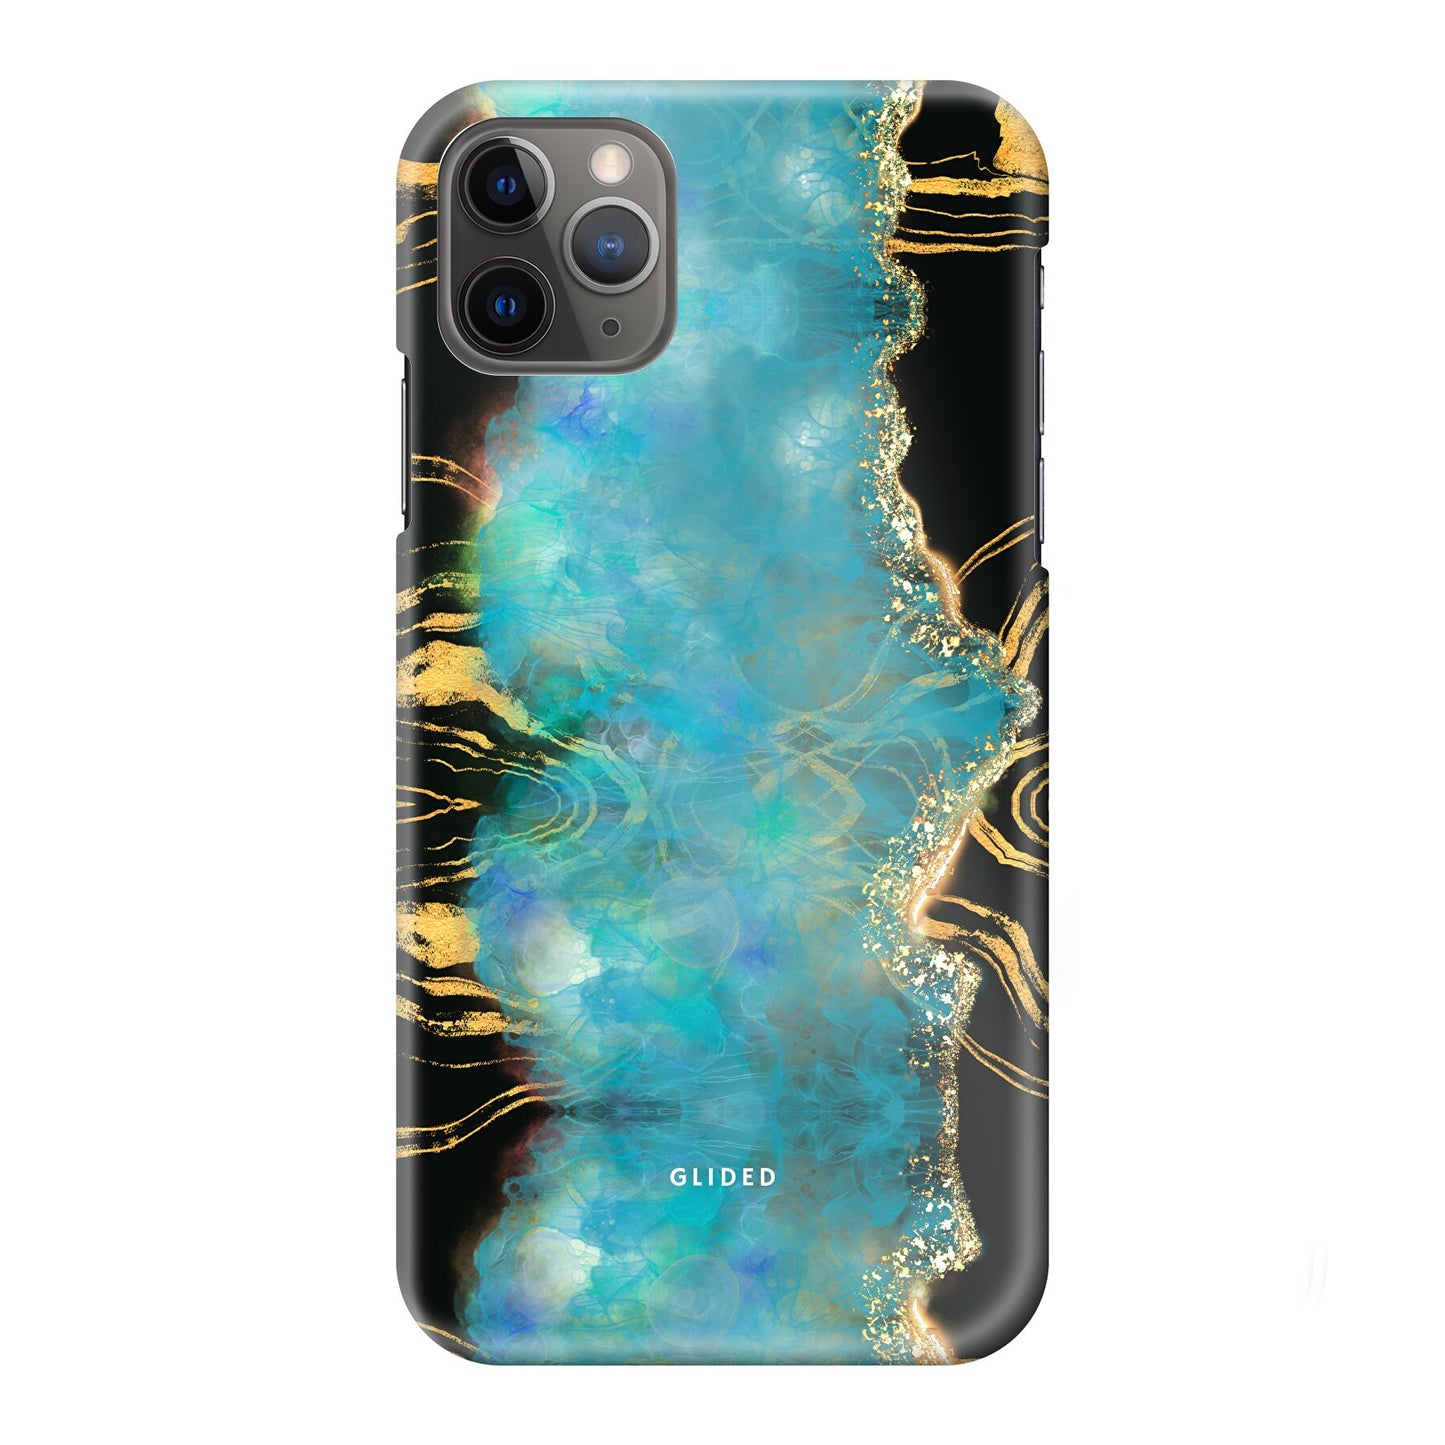 Waterly - iPhone 11 Pro Max Handyhülle Hard Case